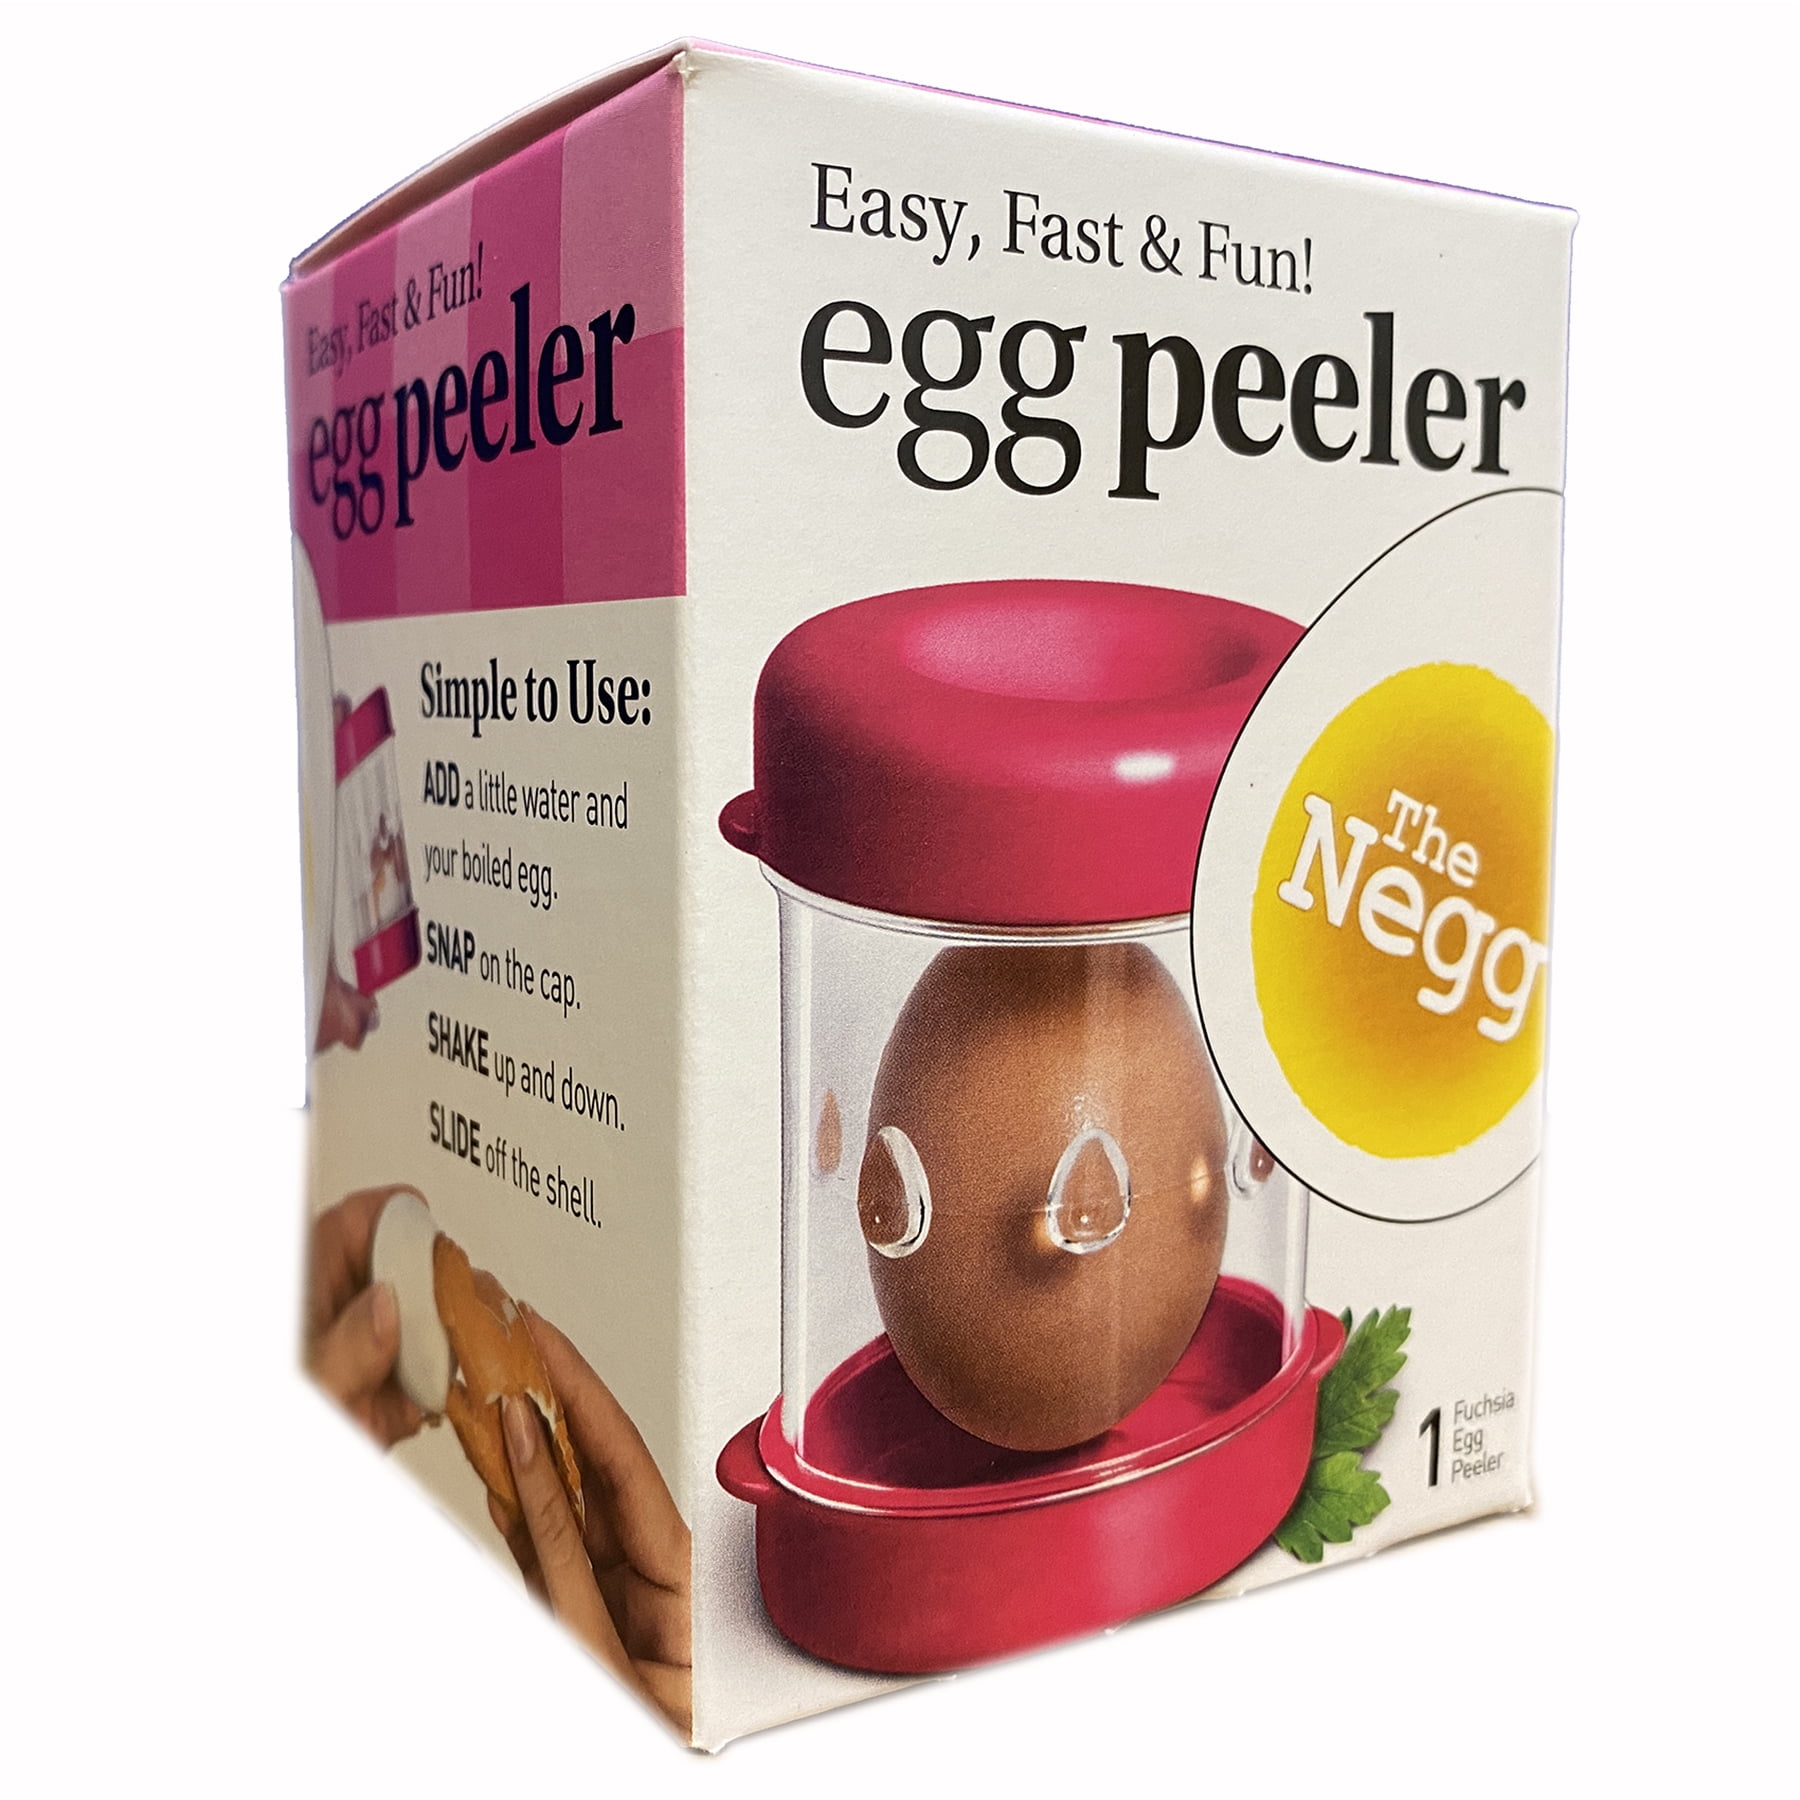 Stacy Talks & Reviews: Egg Peeling Made Easy with The Negg!